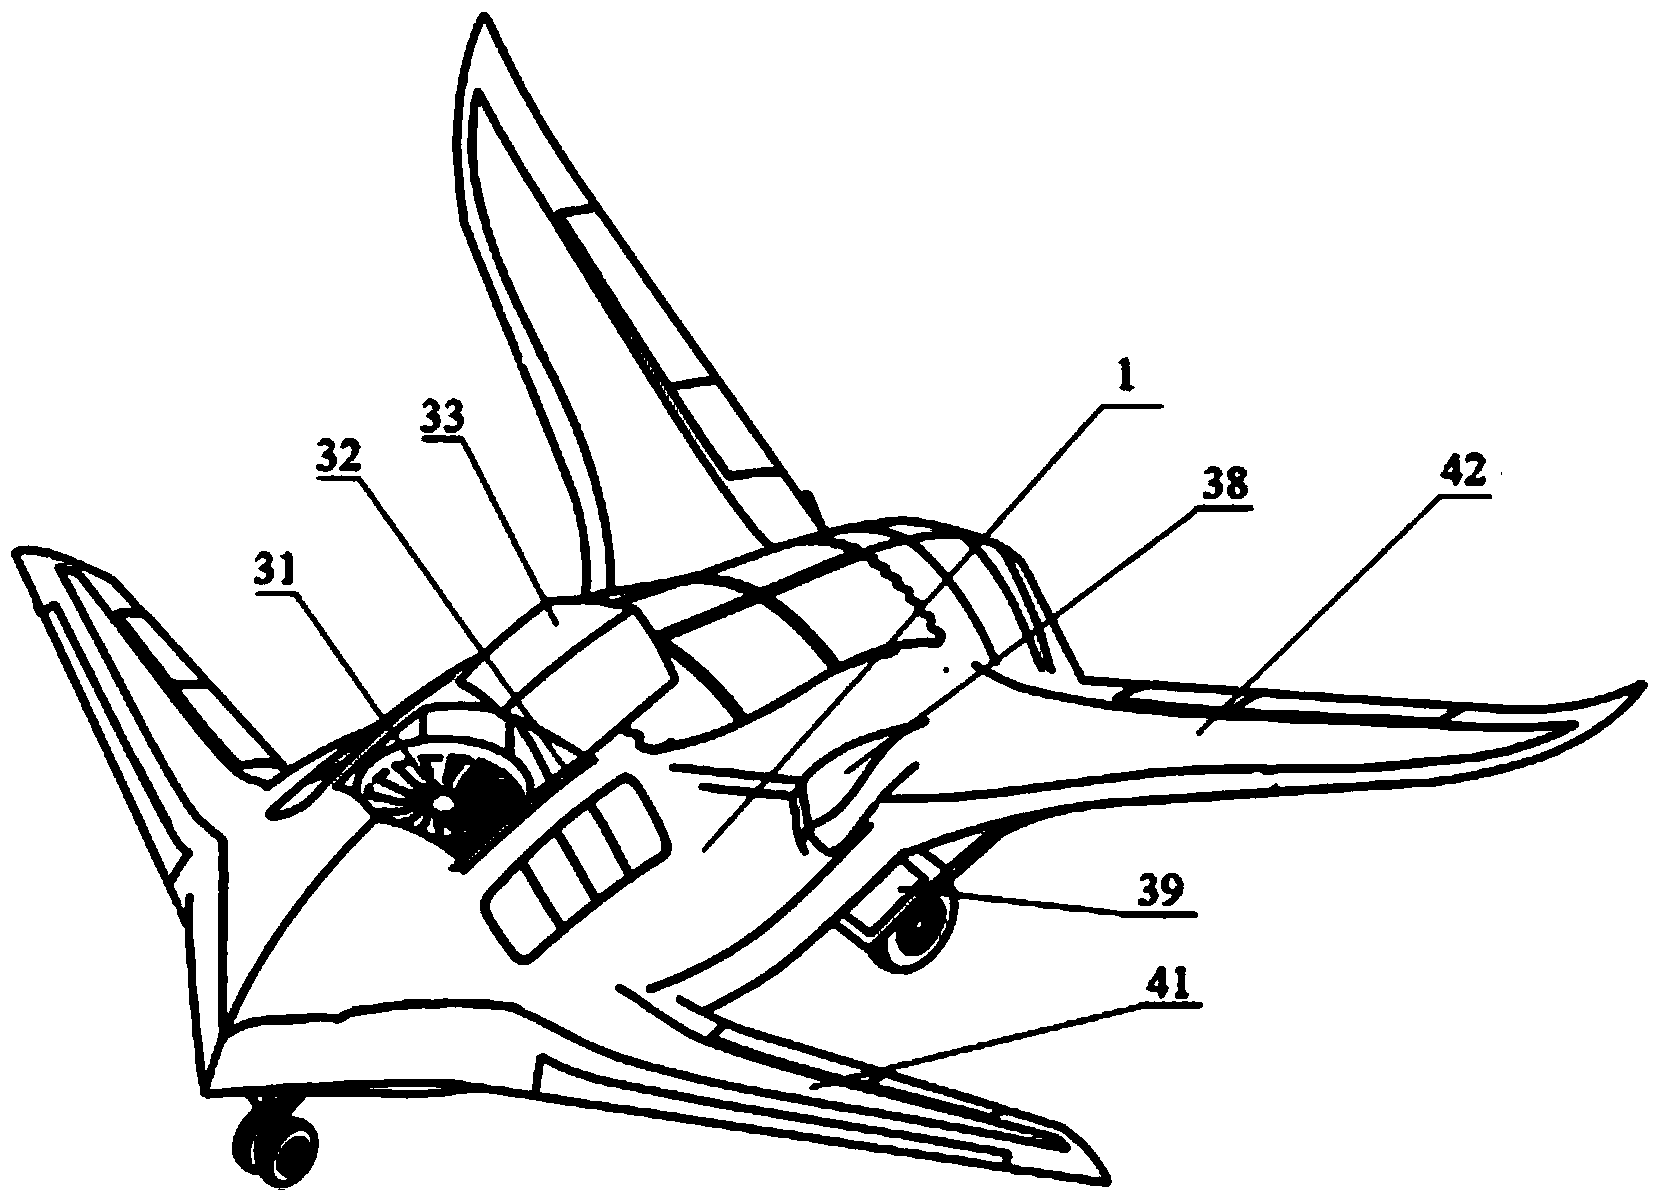 Hovering type folding wing lifting body aircraft based on variable centroid technology